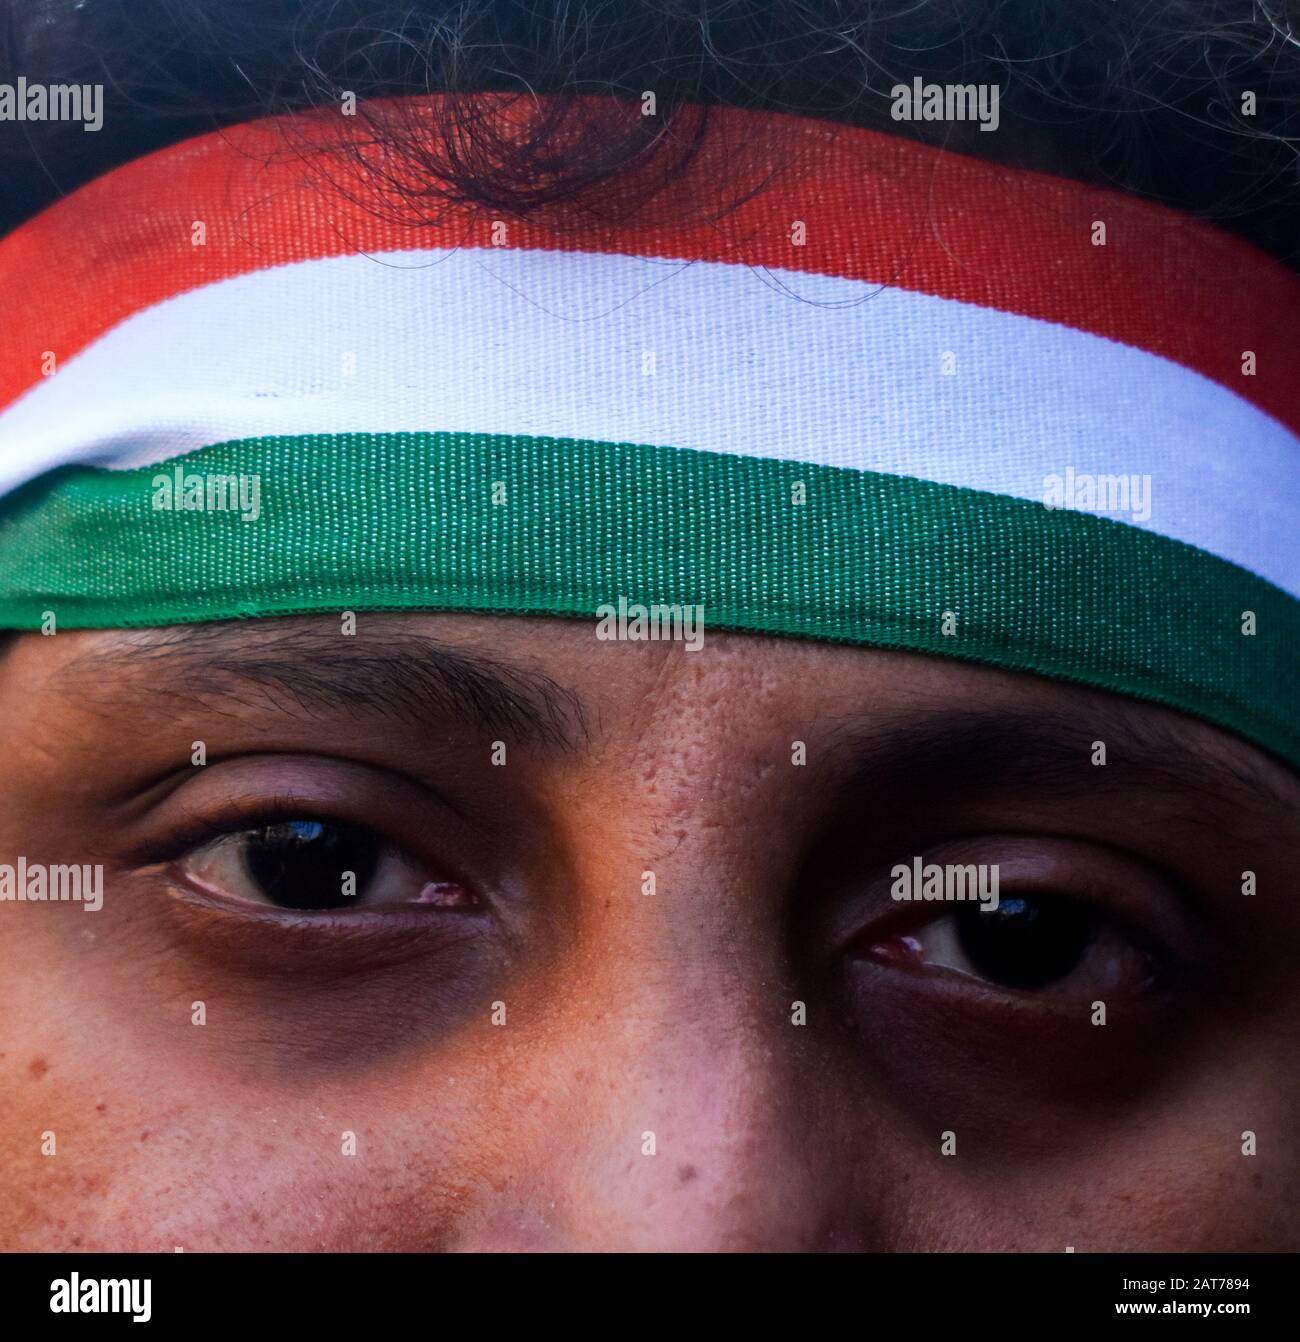 A protester is wearing tri colour ribbon on his head during a protest rally in Kolkata, India. Stock Photo